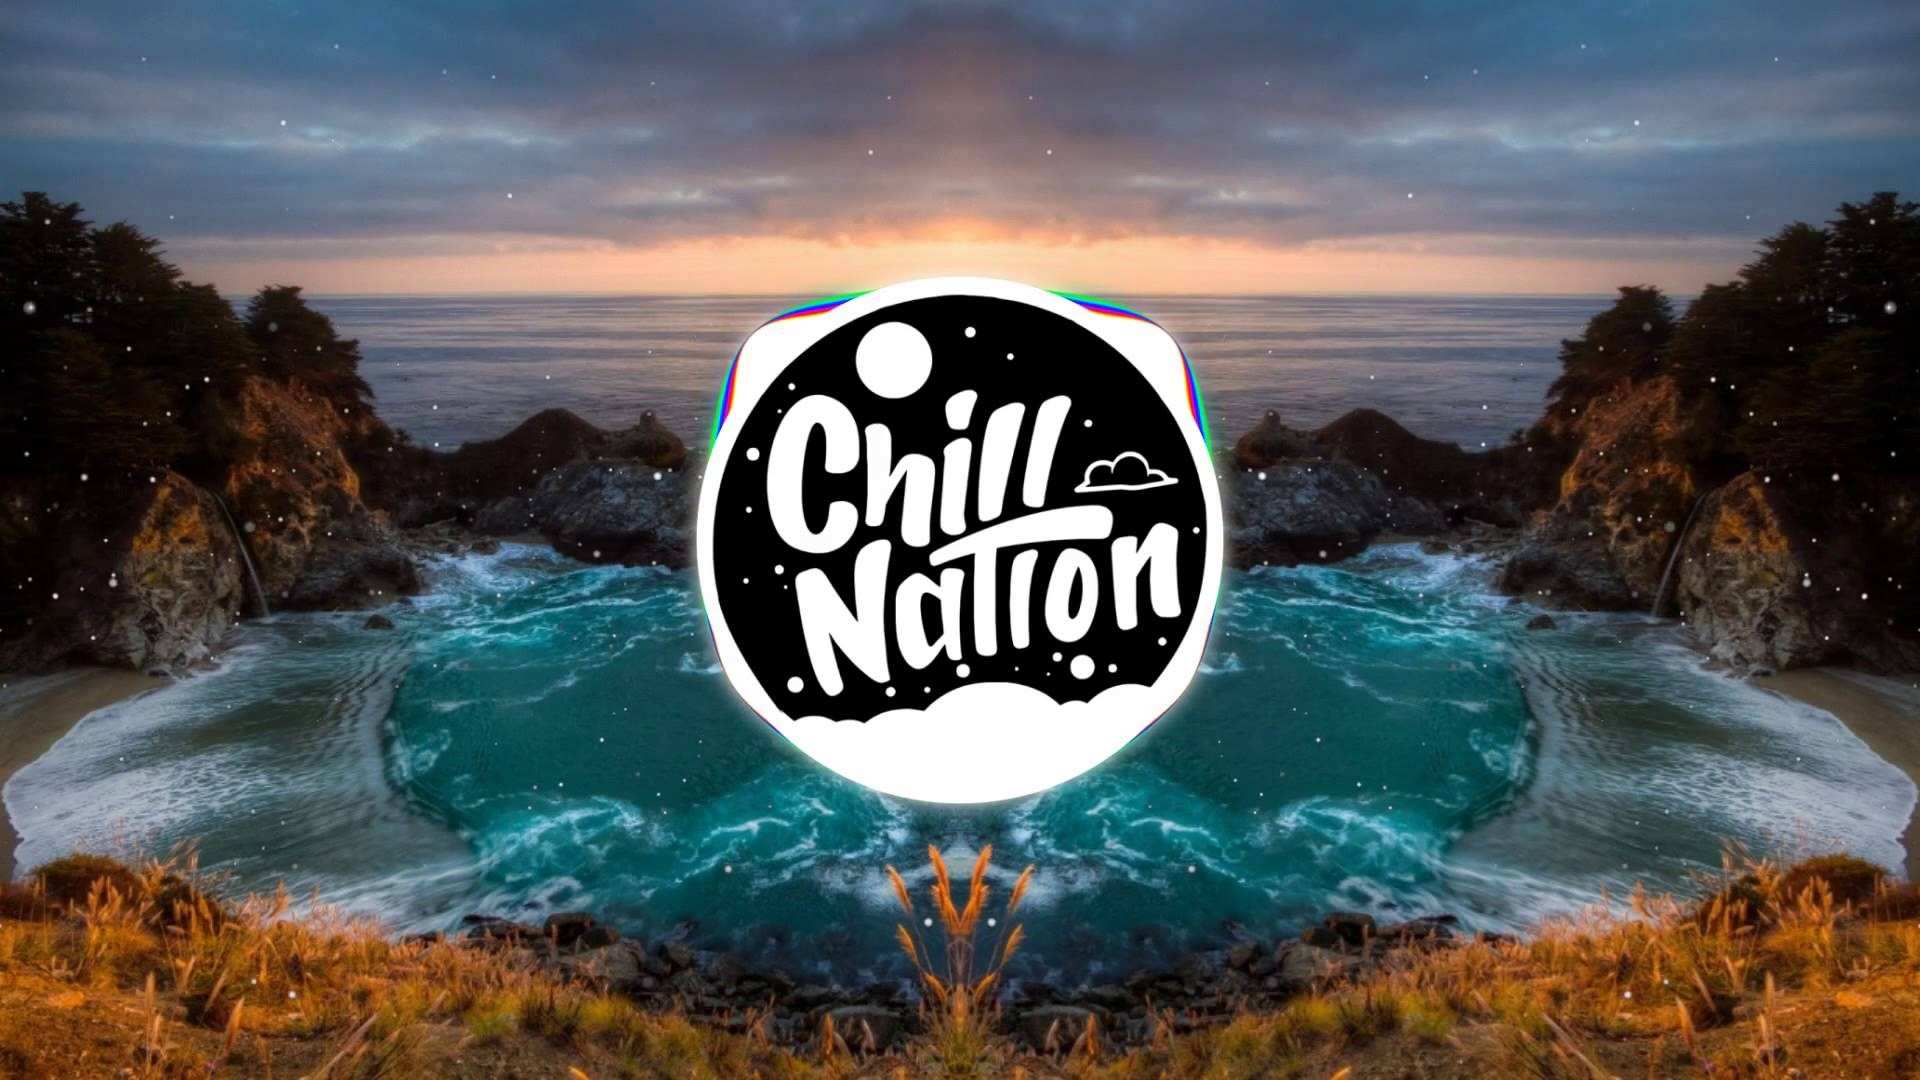 Subtact Falling - Chill Nation Album Cover , HD Wallpaper & Backgrounds